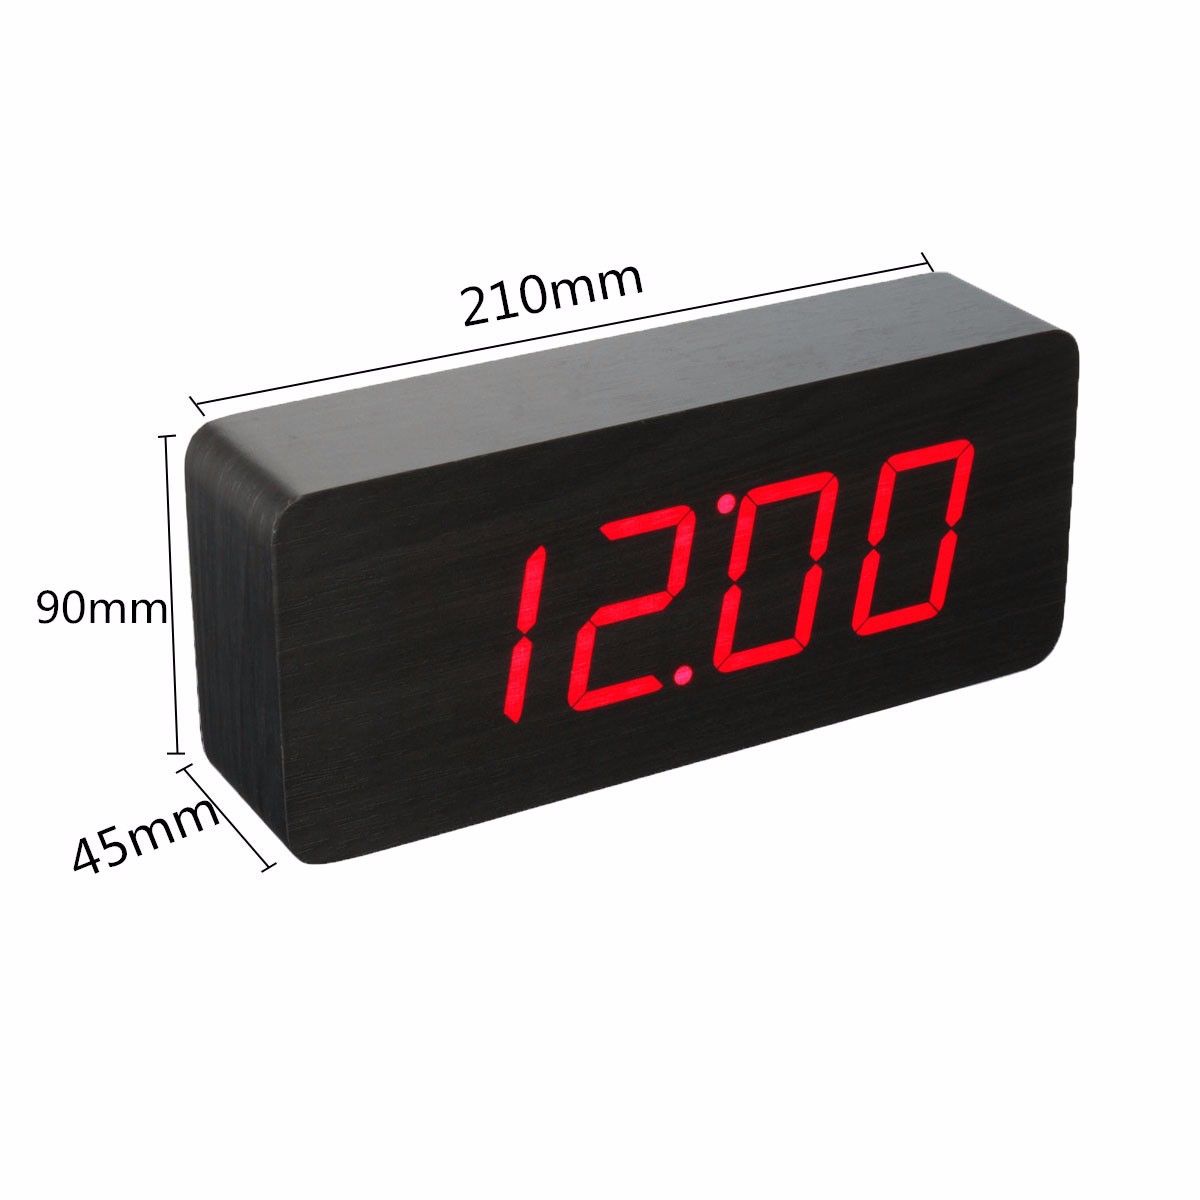 Multifunctional-Wooden-Digital-Clock-Two-Modes-Default-Display-Time-Built-in-Battery-Voice-Control-S-1891907-8